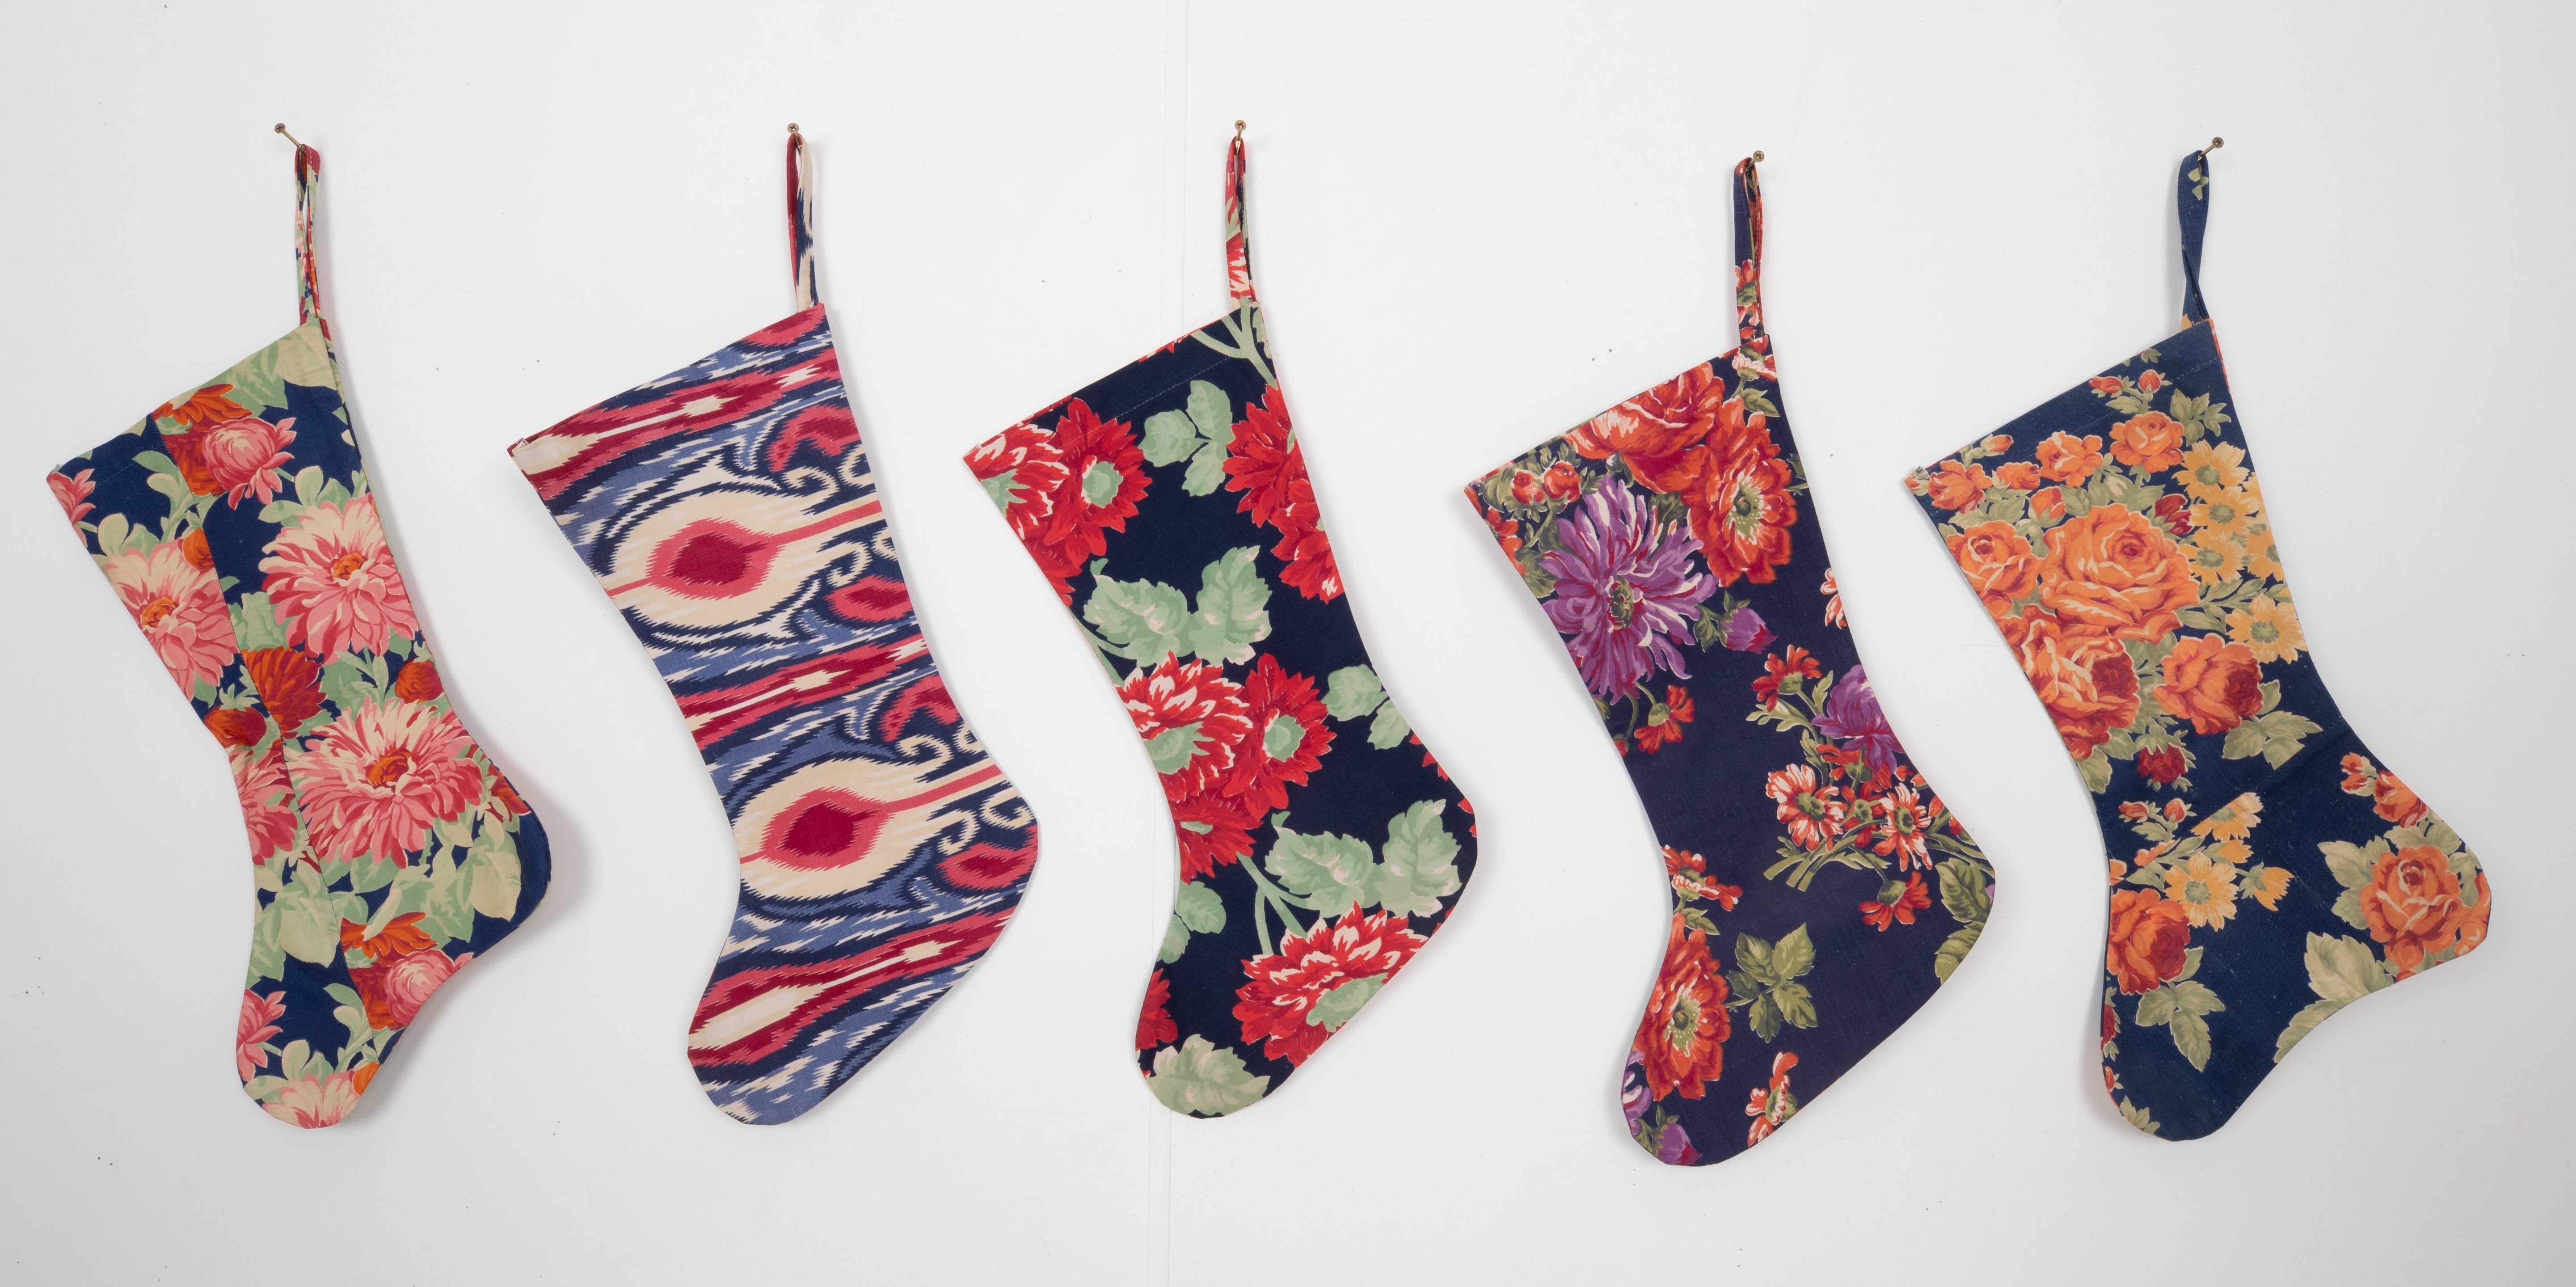 These Christmas Stockings were made from mıd 20th C. Russıan Roller Prınted Texiles

Please note, these stockings were made from Russian roller printed Textile Fragments from 1960s.

